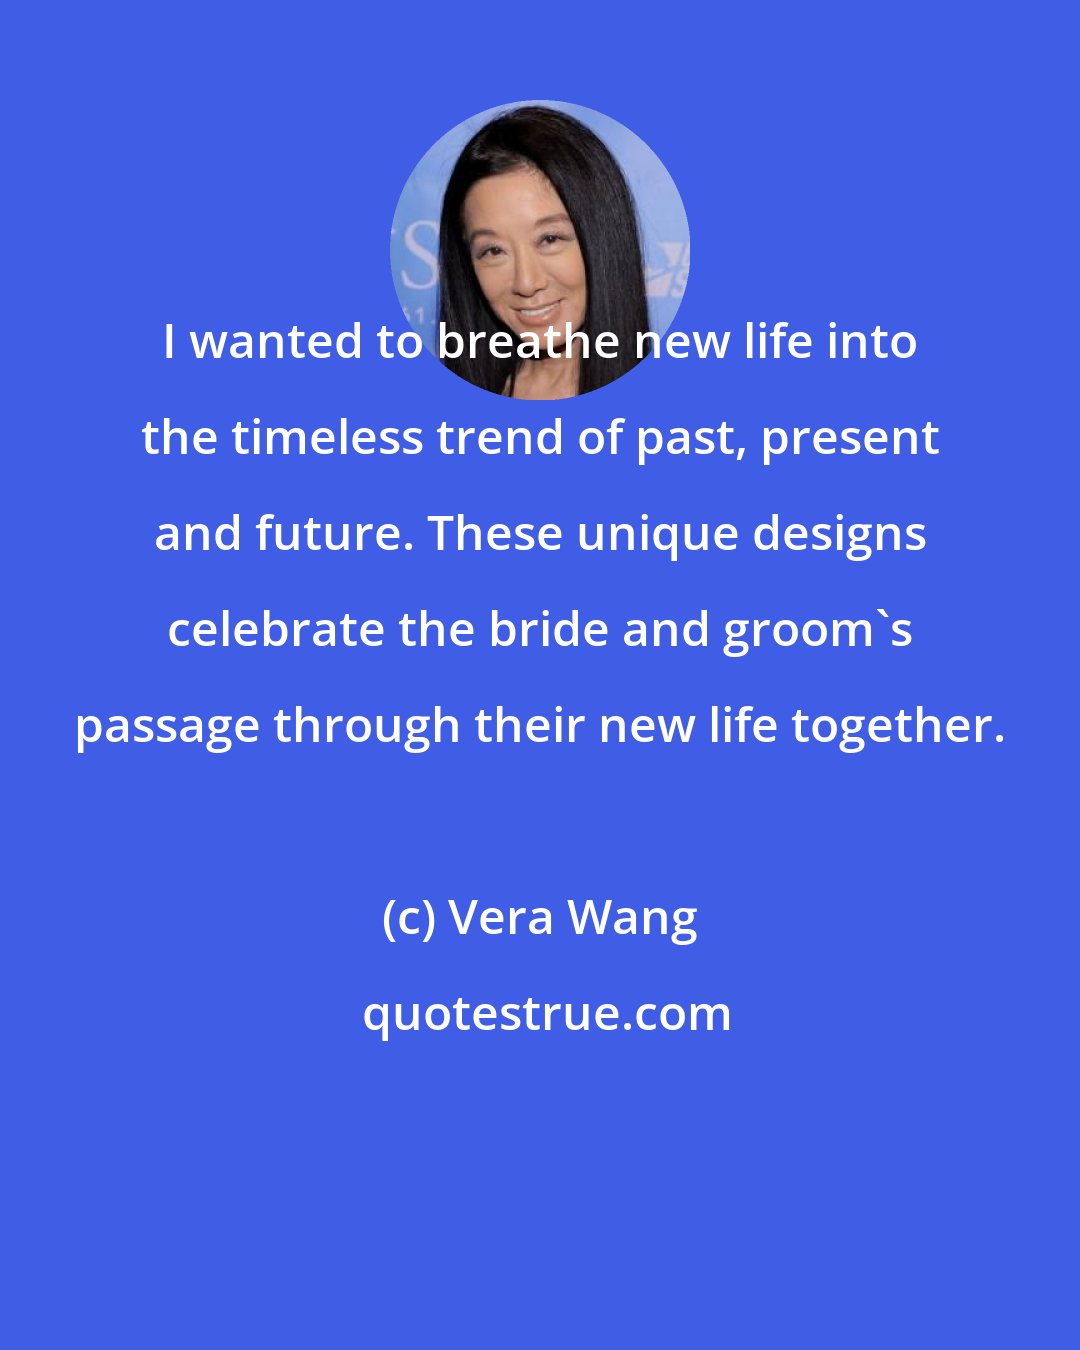 Vera Wang: I wanted to breathe new life into the timeless trend of past, present and future. These unique designs celebrate the bride and groom's passage through their new life together.